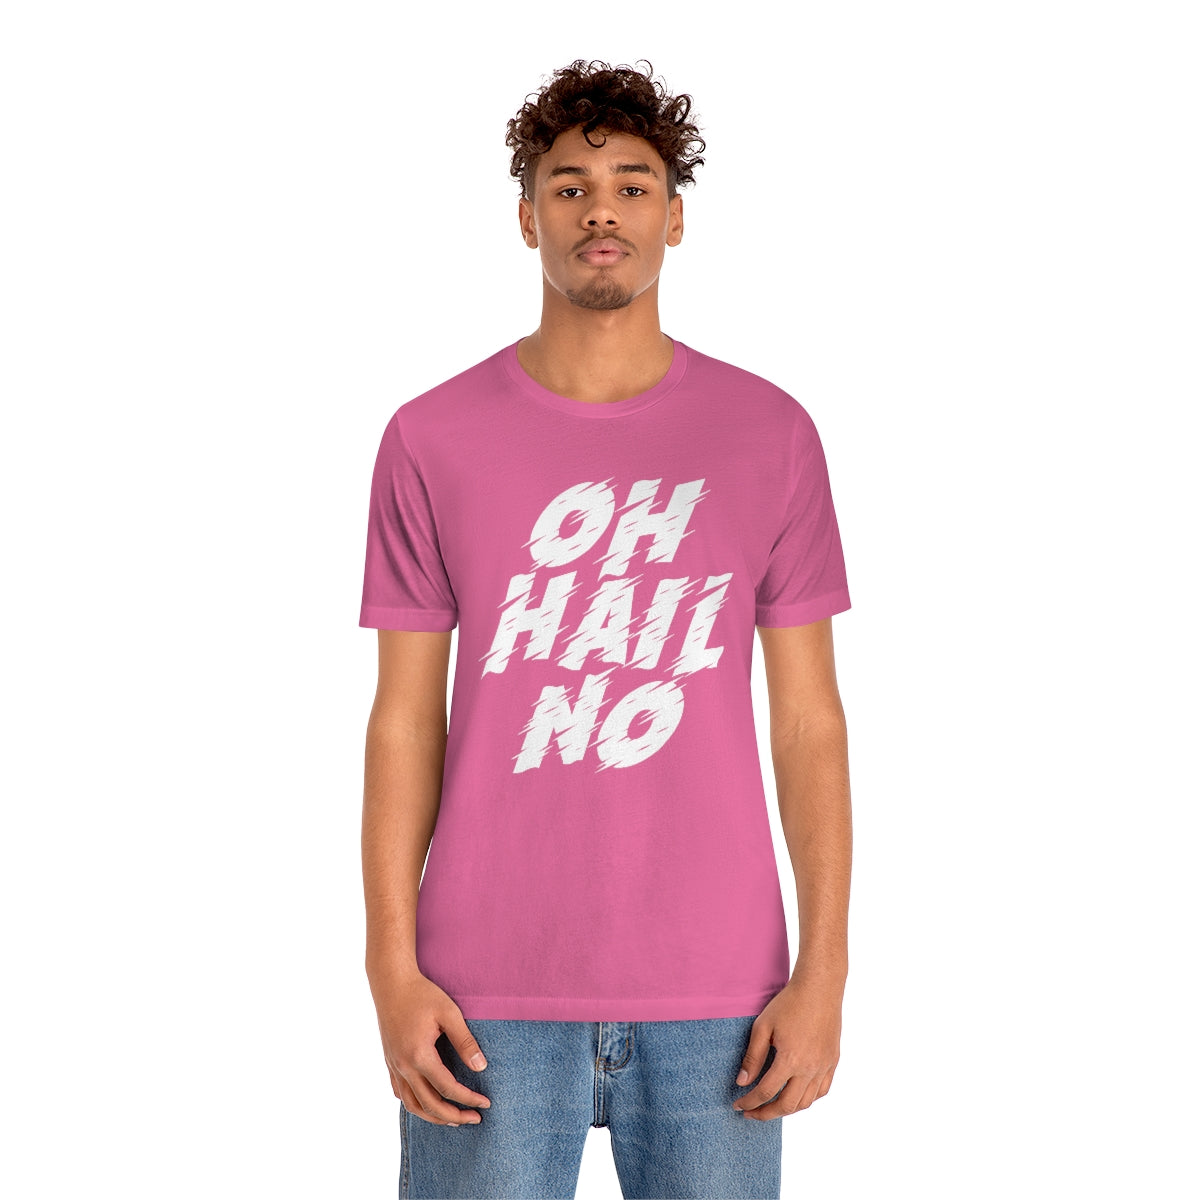 Oh Hail No – Helicity Designs Tee